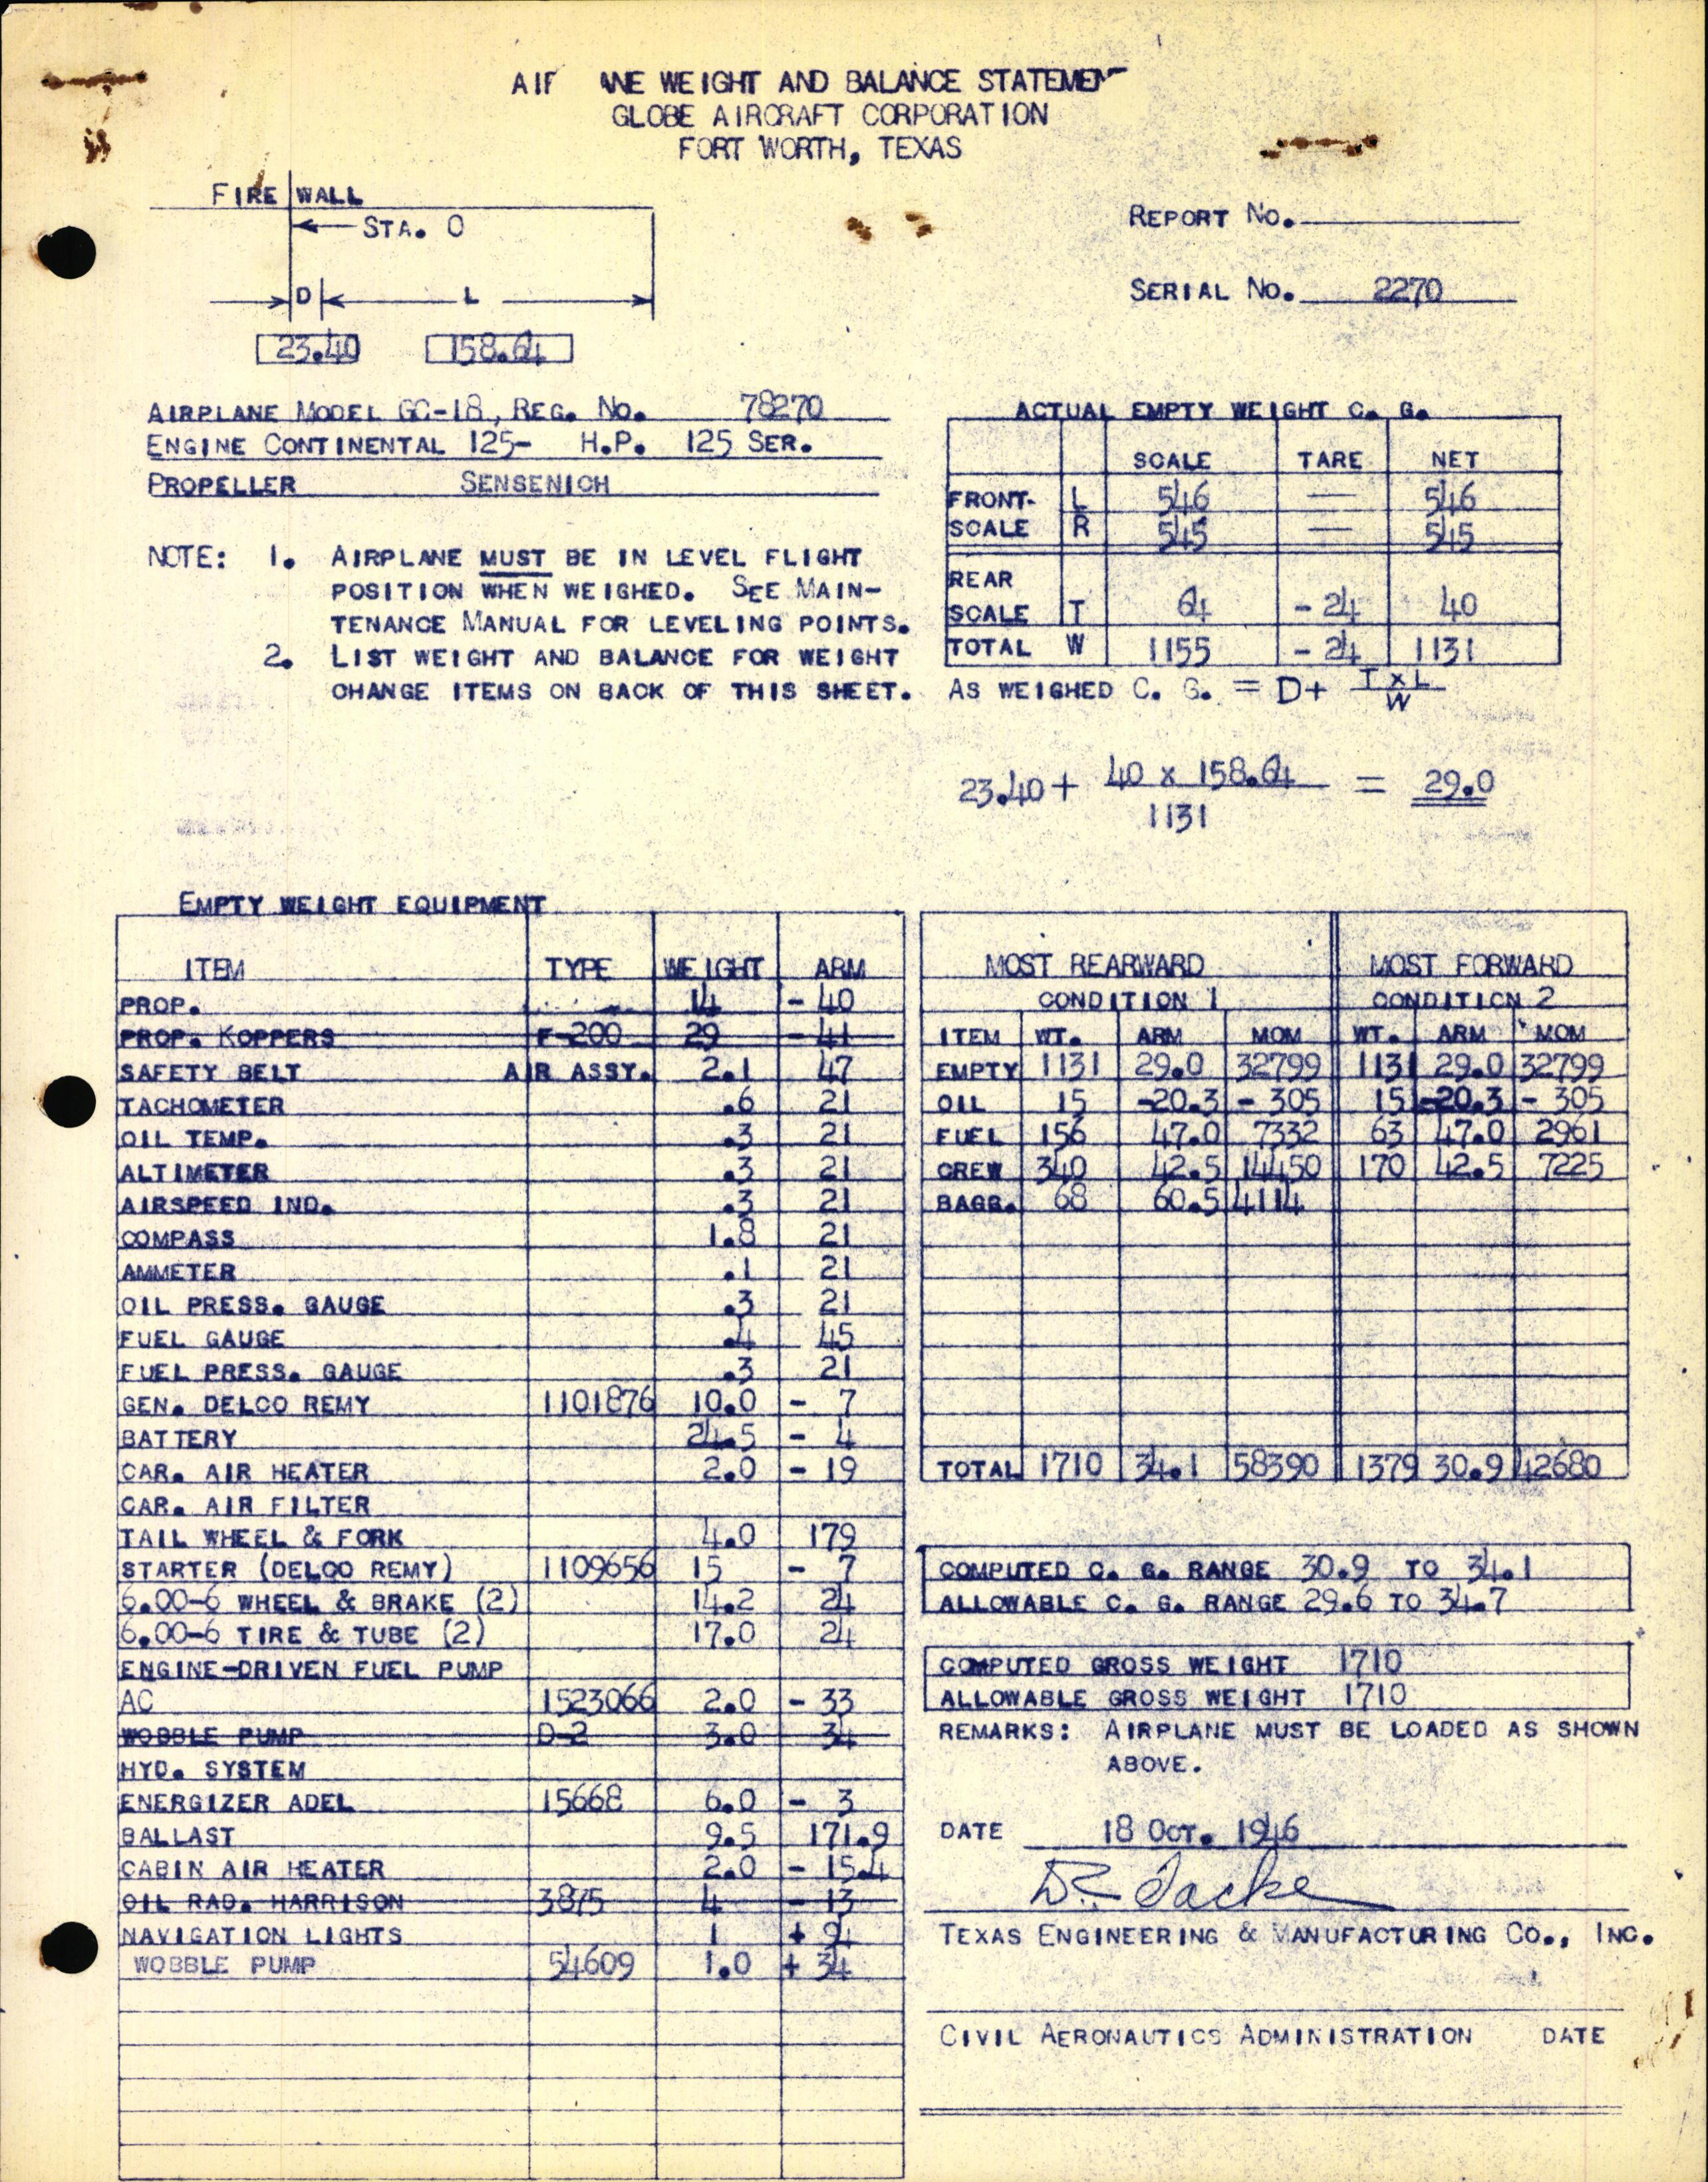 Sample page 1 from AirCorps Library document: Technical Information for Serial Number 2270